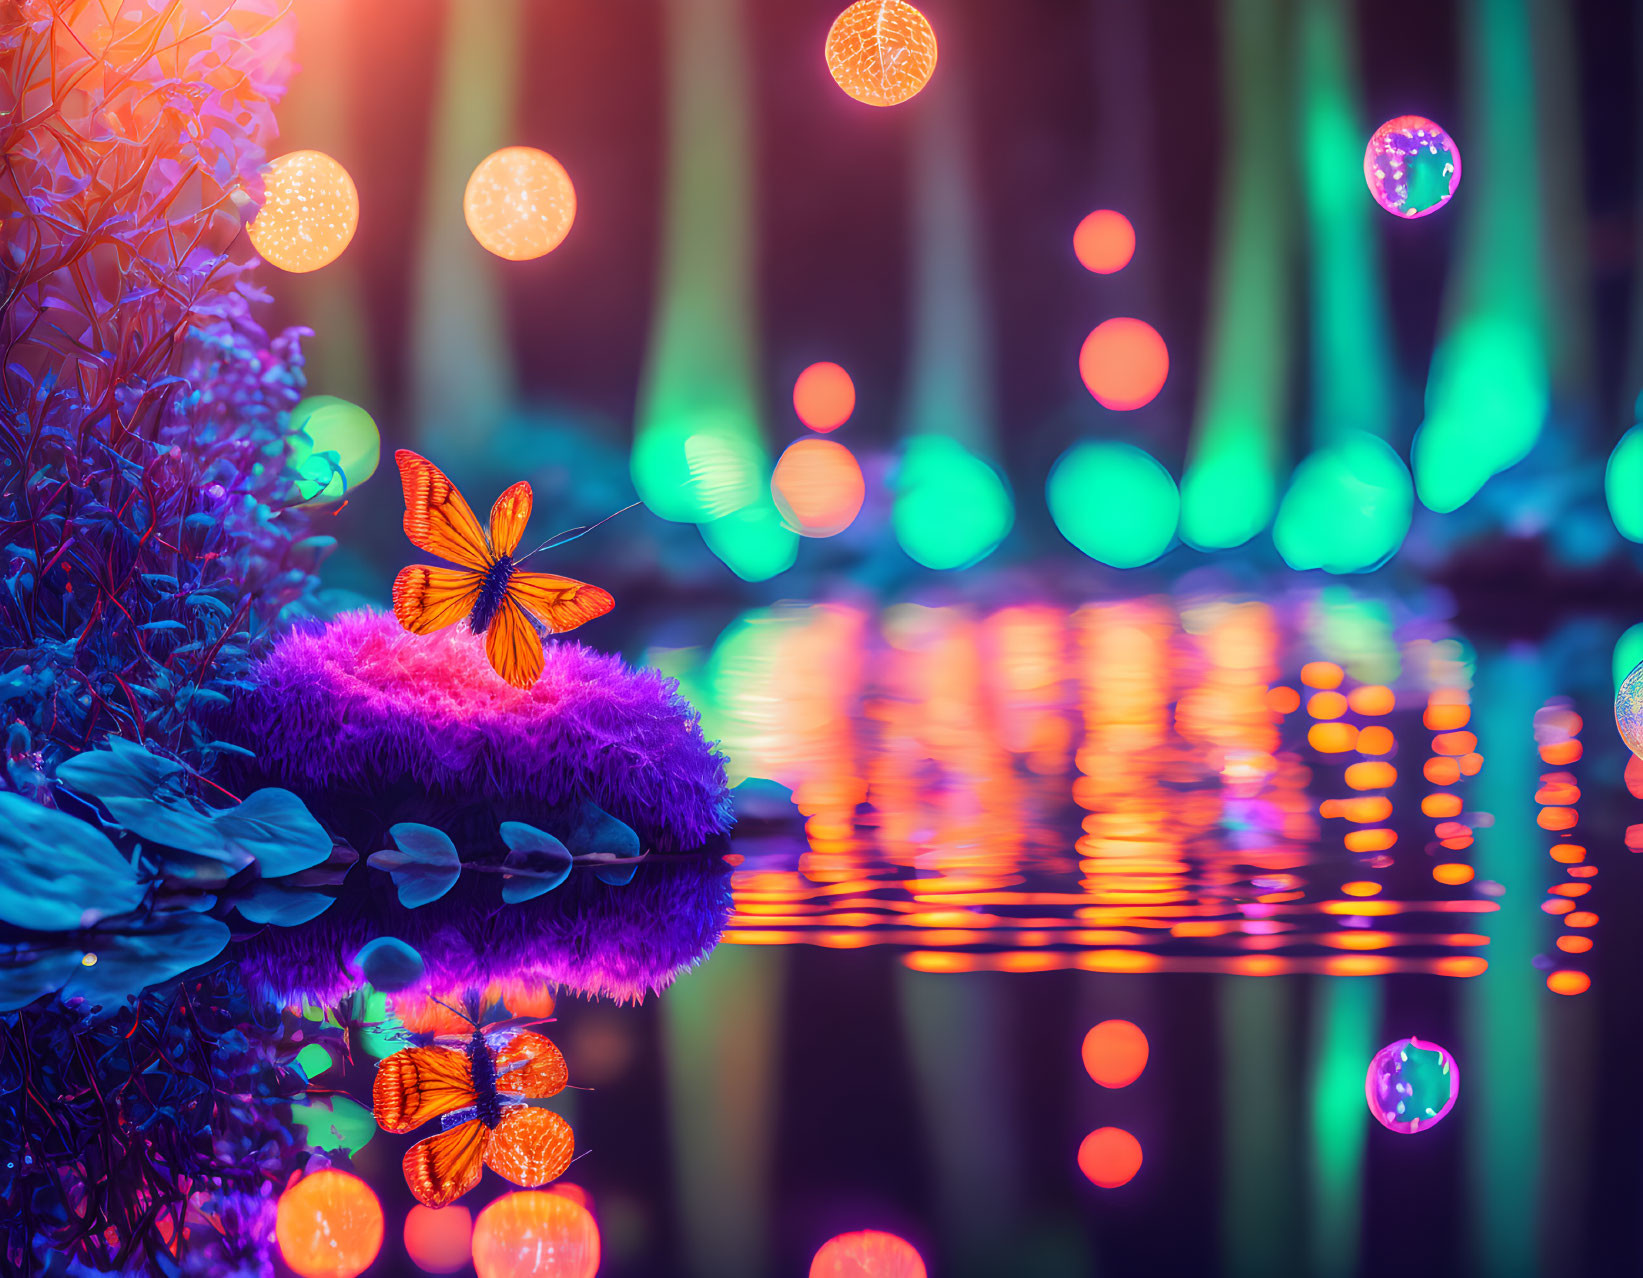 Colorful Butterfly on Purple Foliage Reflecting in Water with Neon Lights